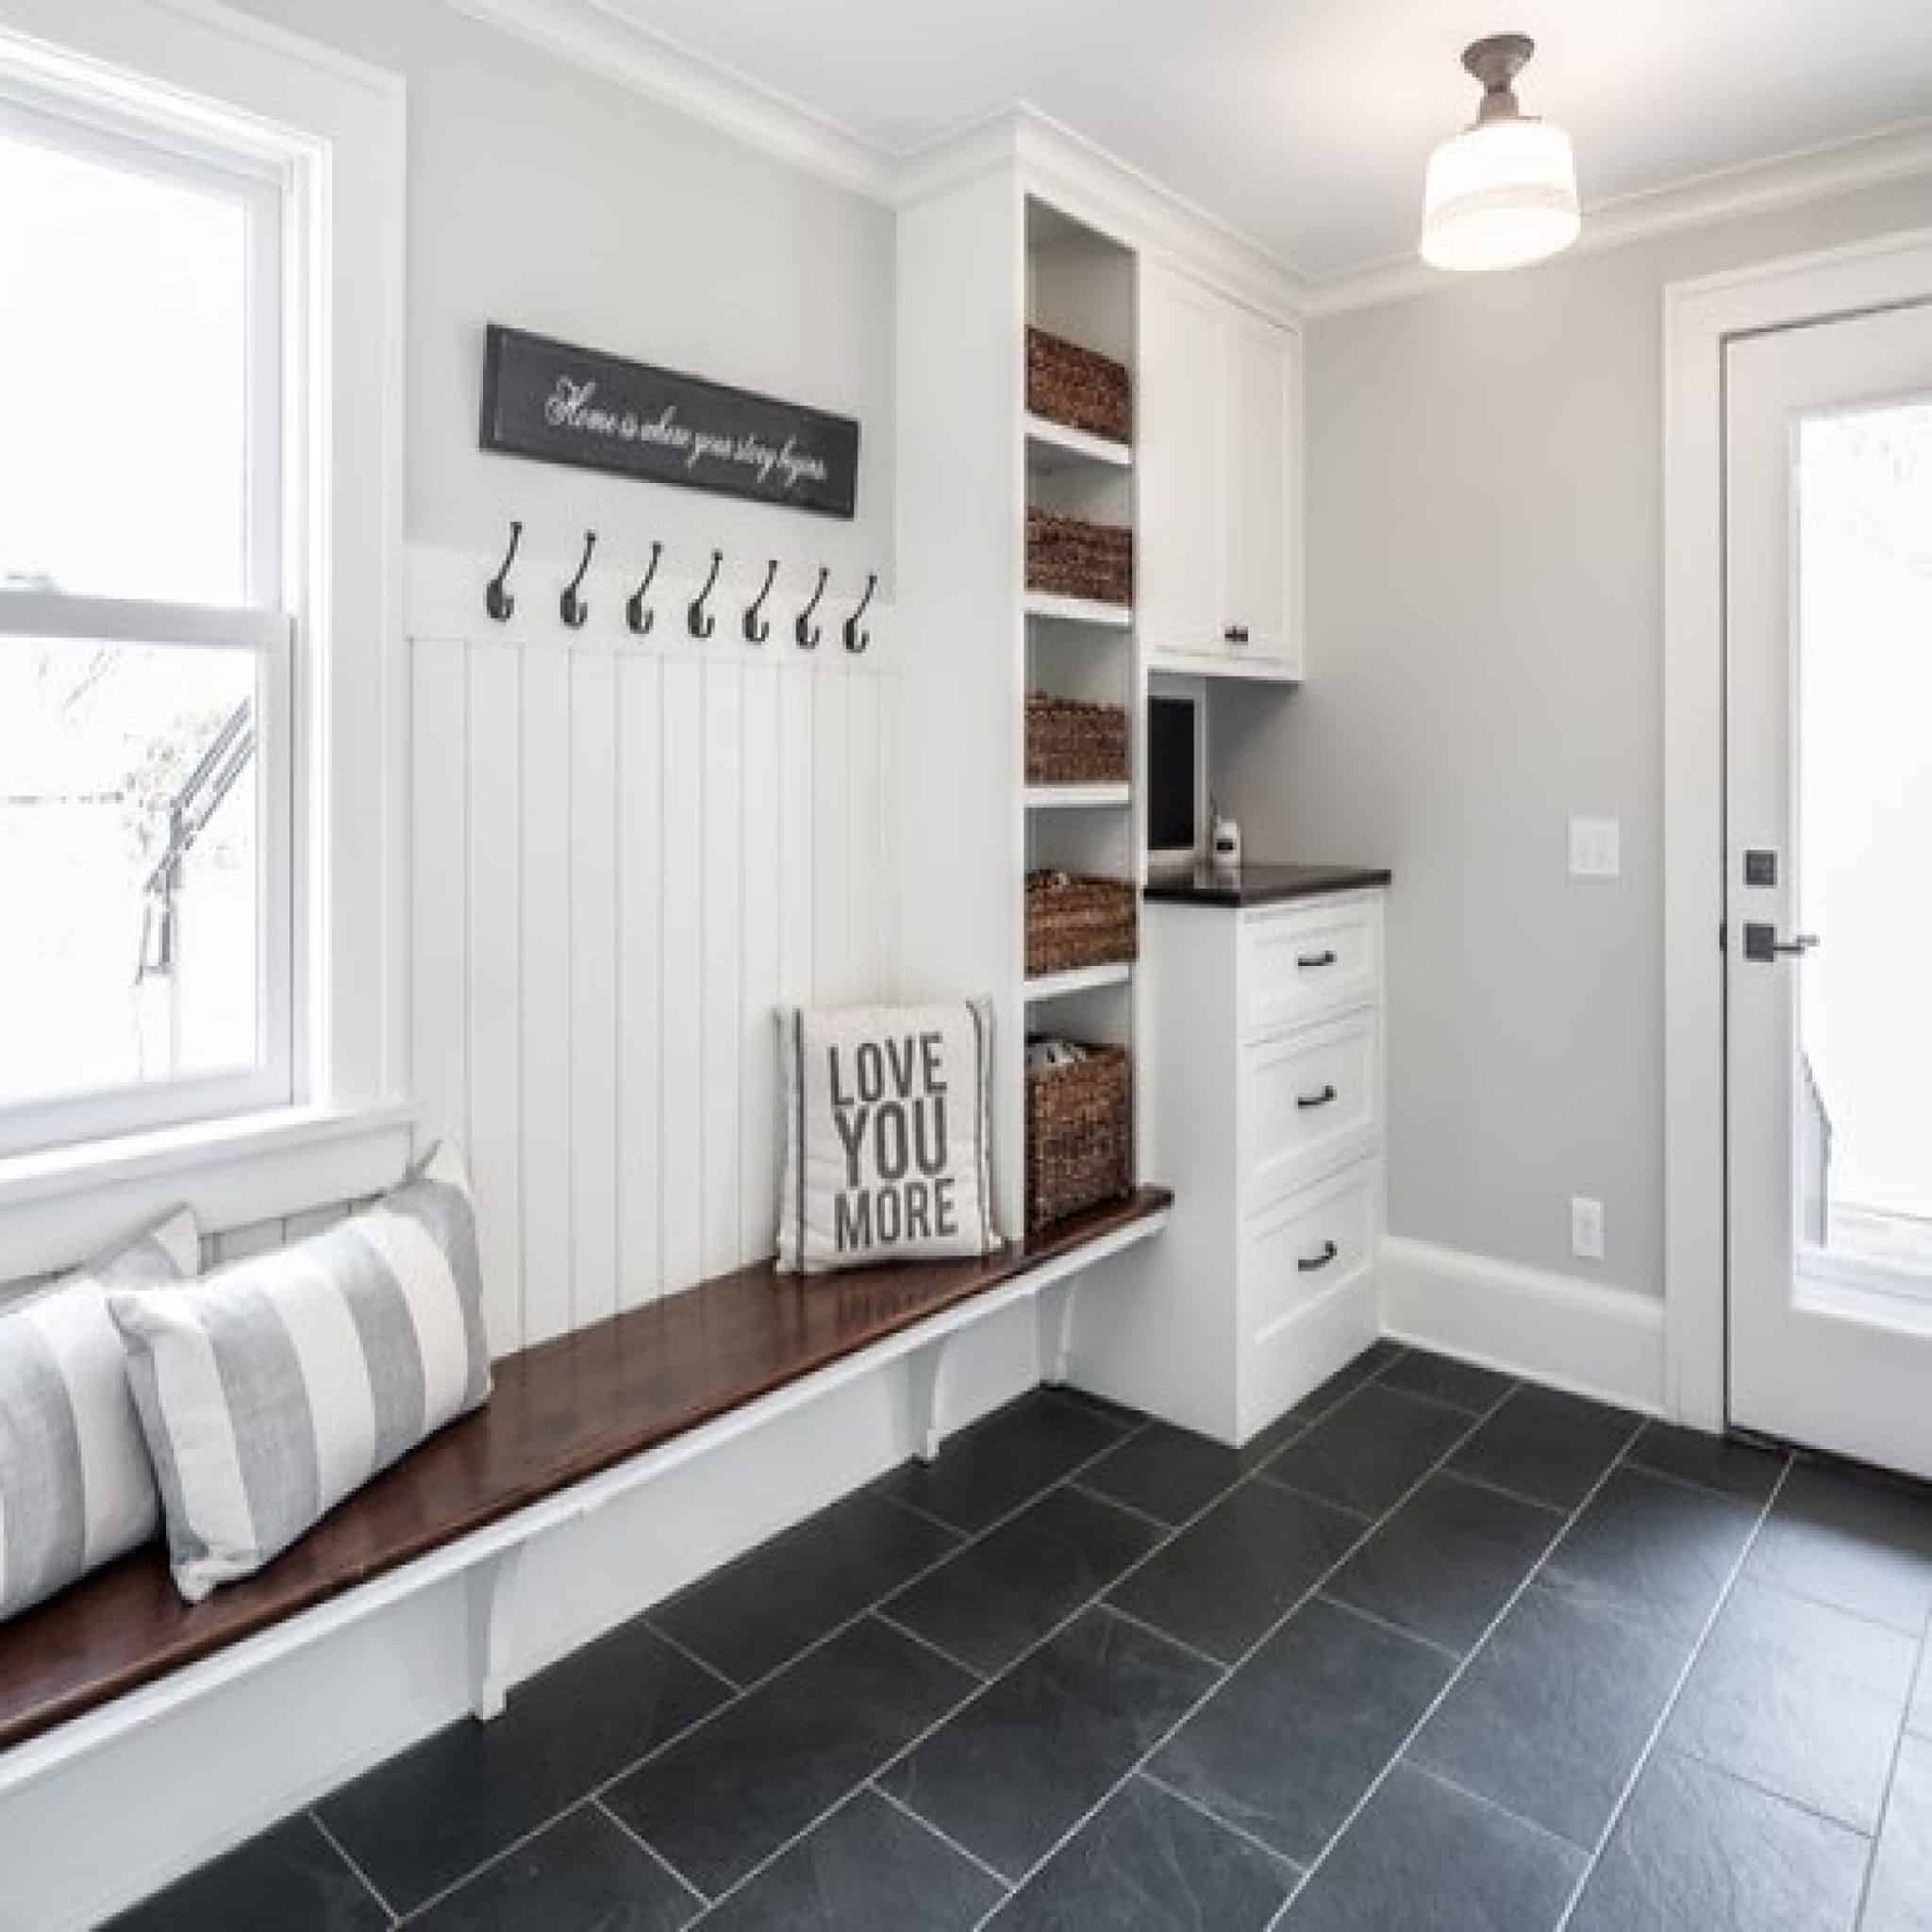 152 Mudroom Ideas & Pictures: Enhance The Entry To The House